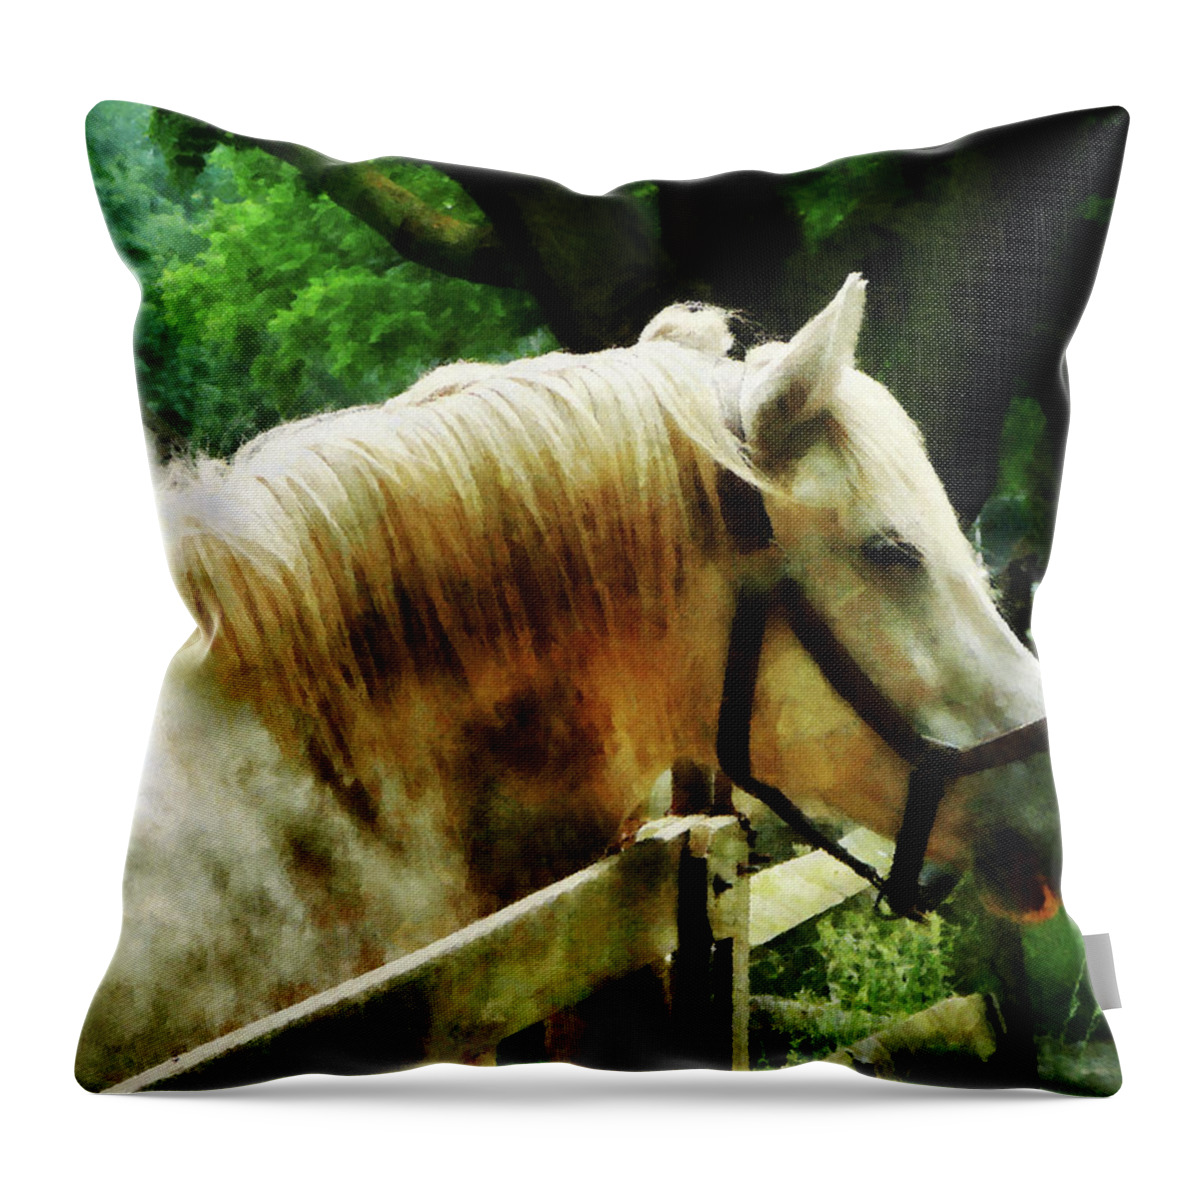 Horse Throw Pillow featuring the photograph White Horse Closeup by Susan Savad